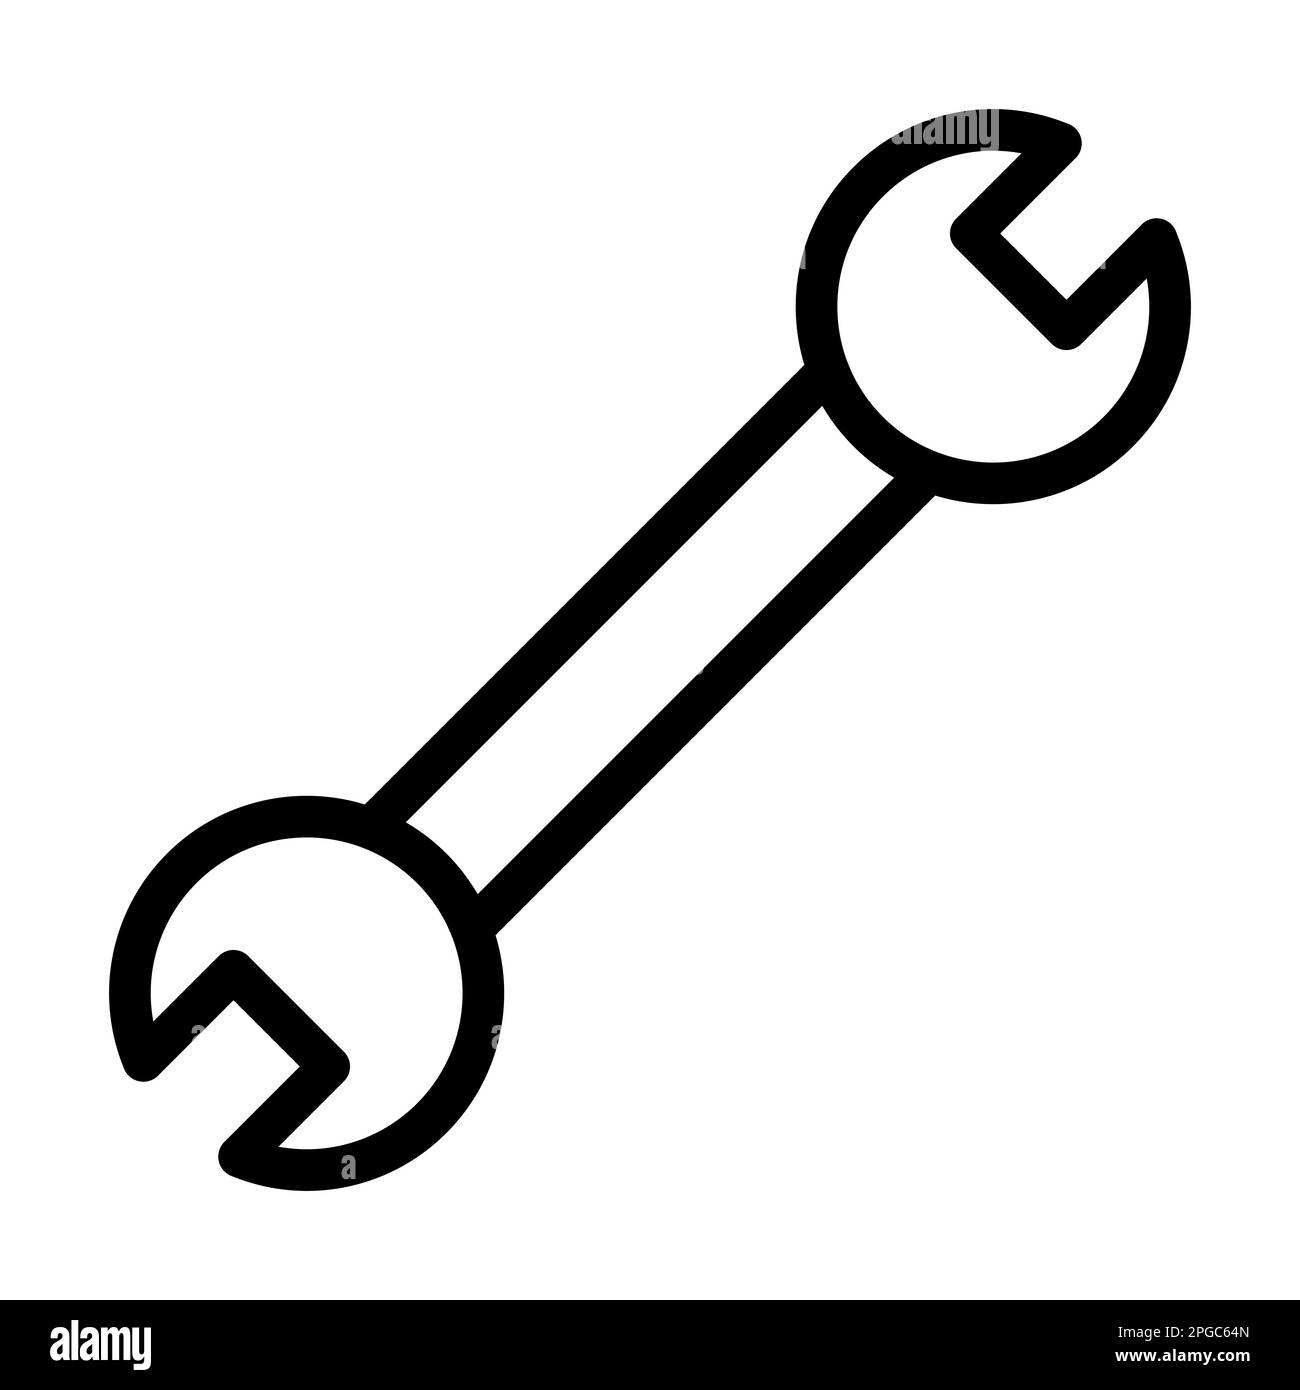 Wrench Vector Thick Line Icon For Personal And Commercial Use. Stock Photo